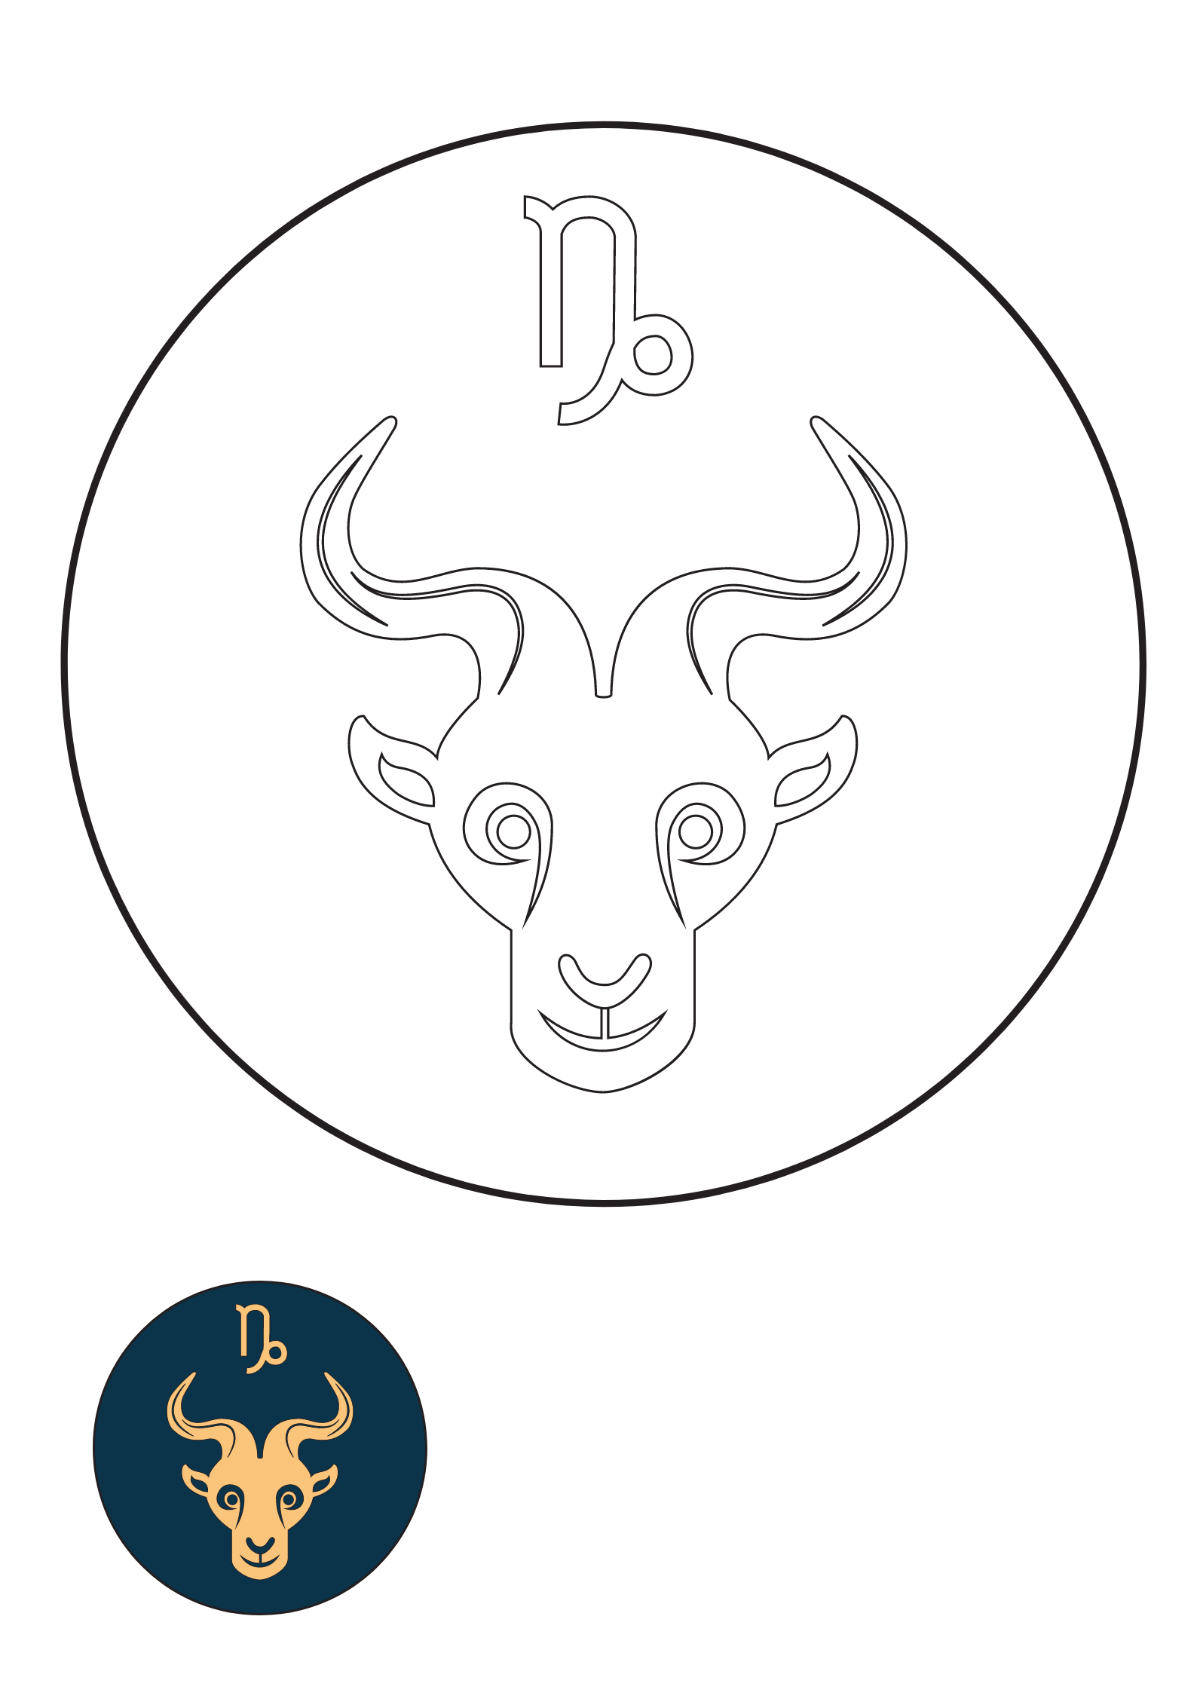 Capricorn Horoscope coloring page